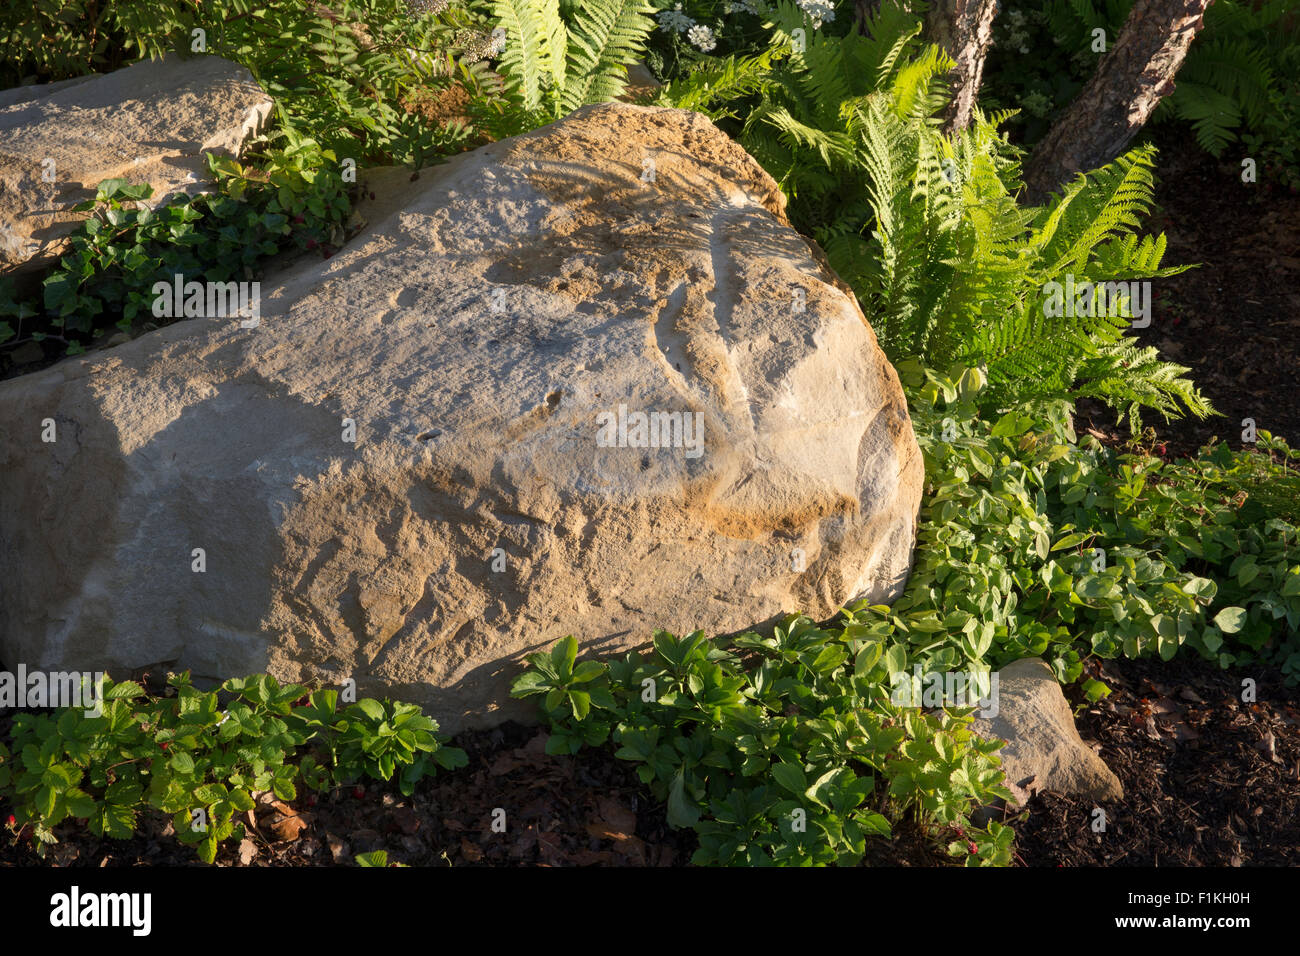 garden with stone boulder hard landscaping in shady shaded area with green ferns UK Stock Photo